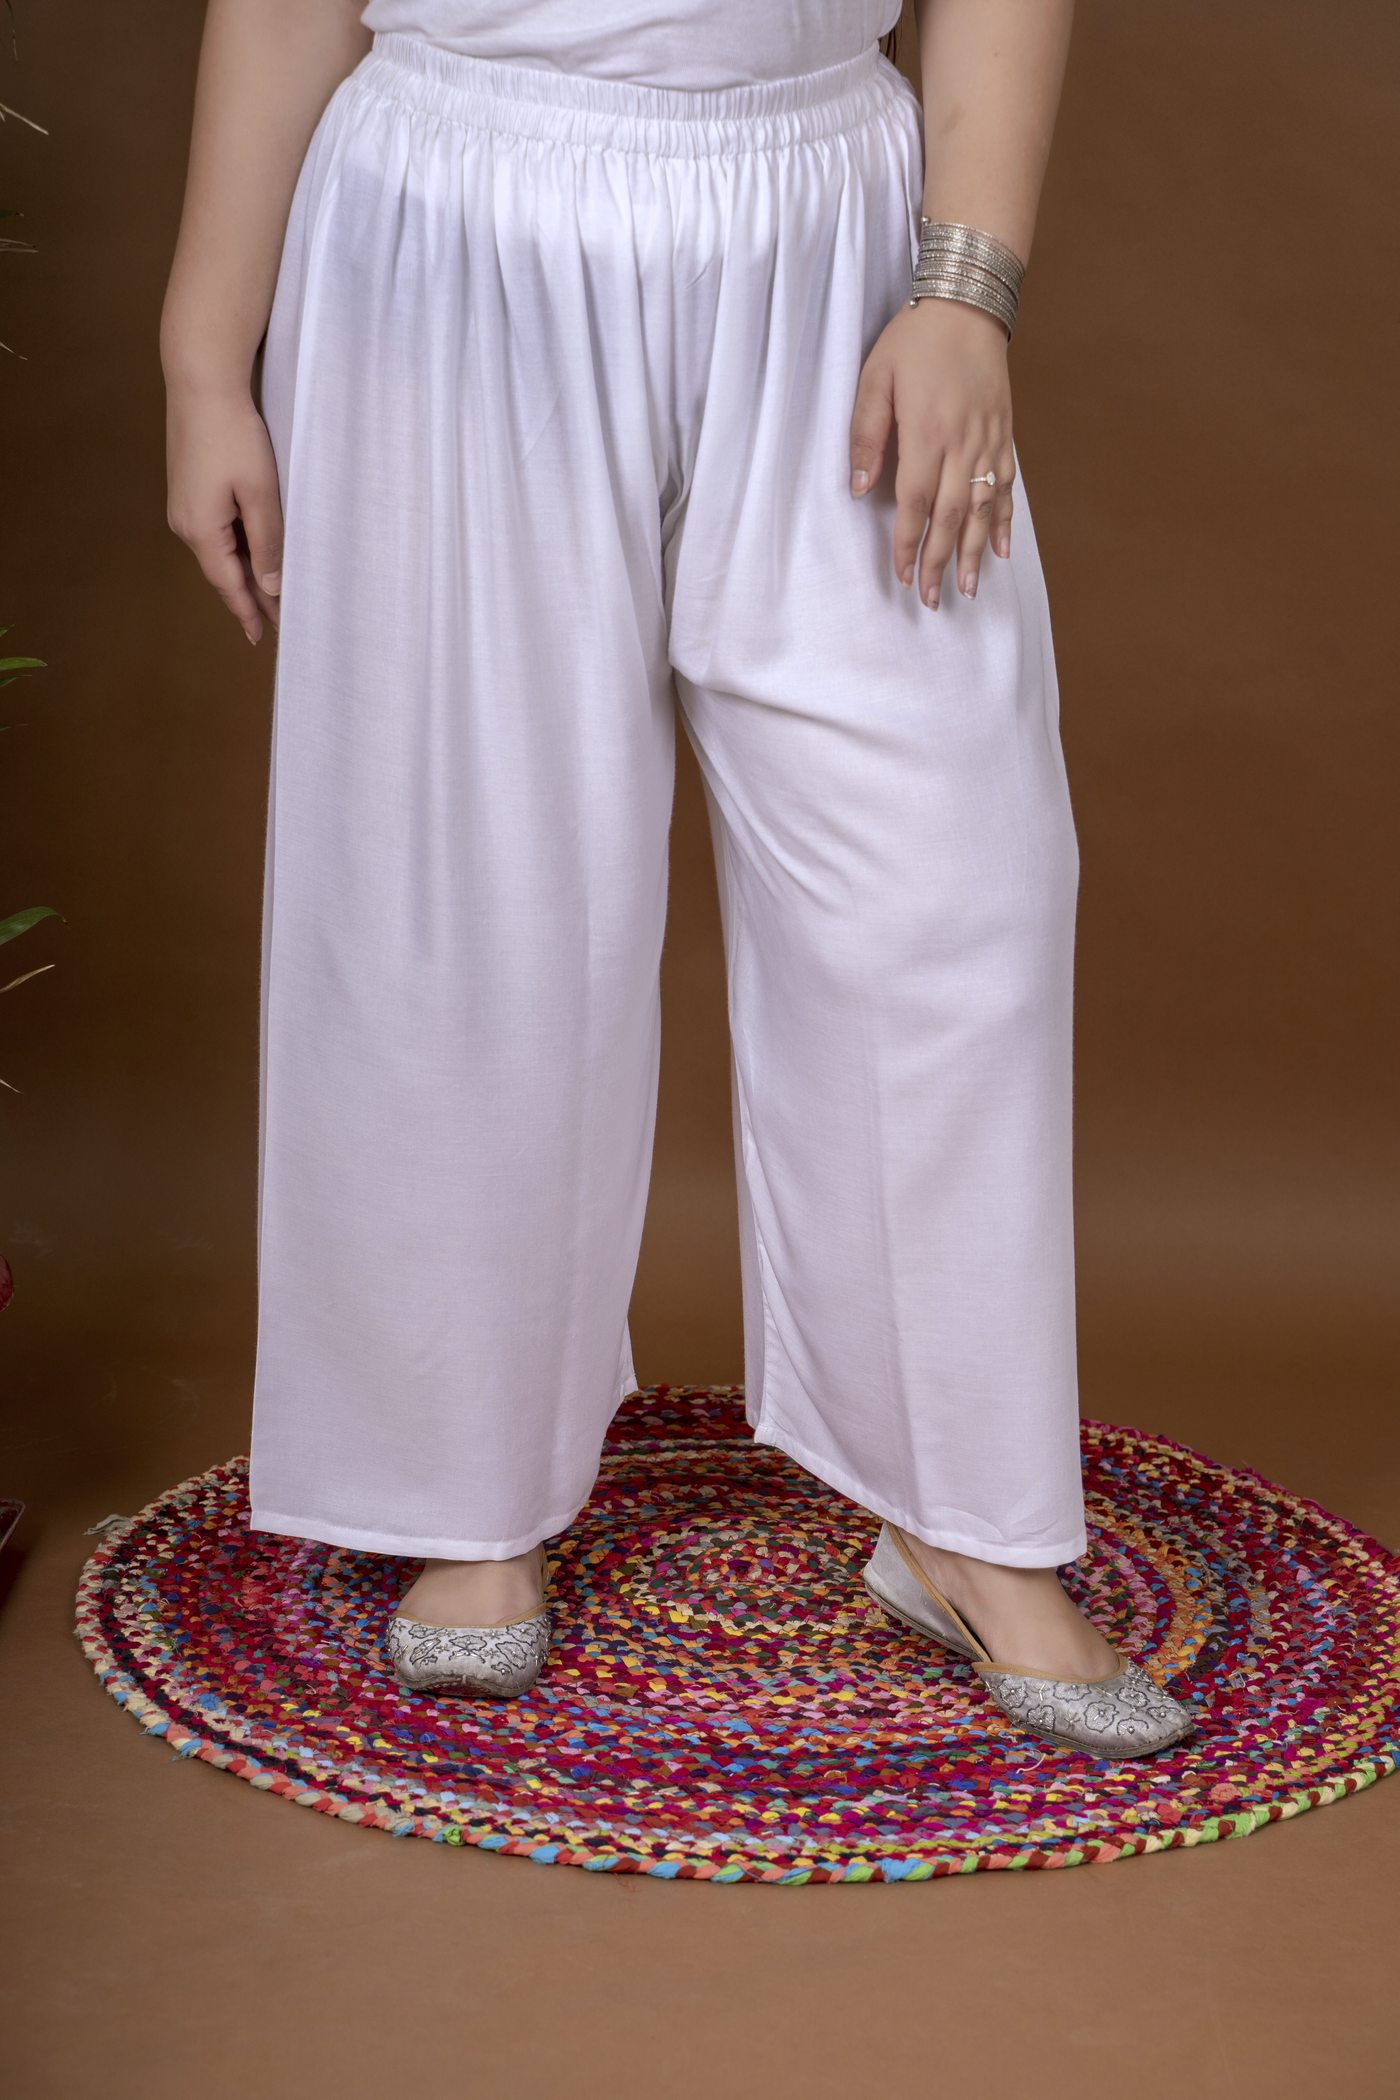 PALAZZO PANTS ARE MY BEST FRIENDS - ZAVALAGAL